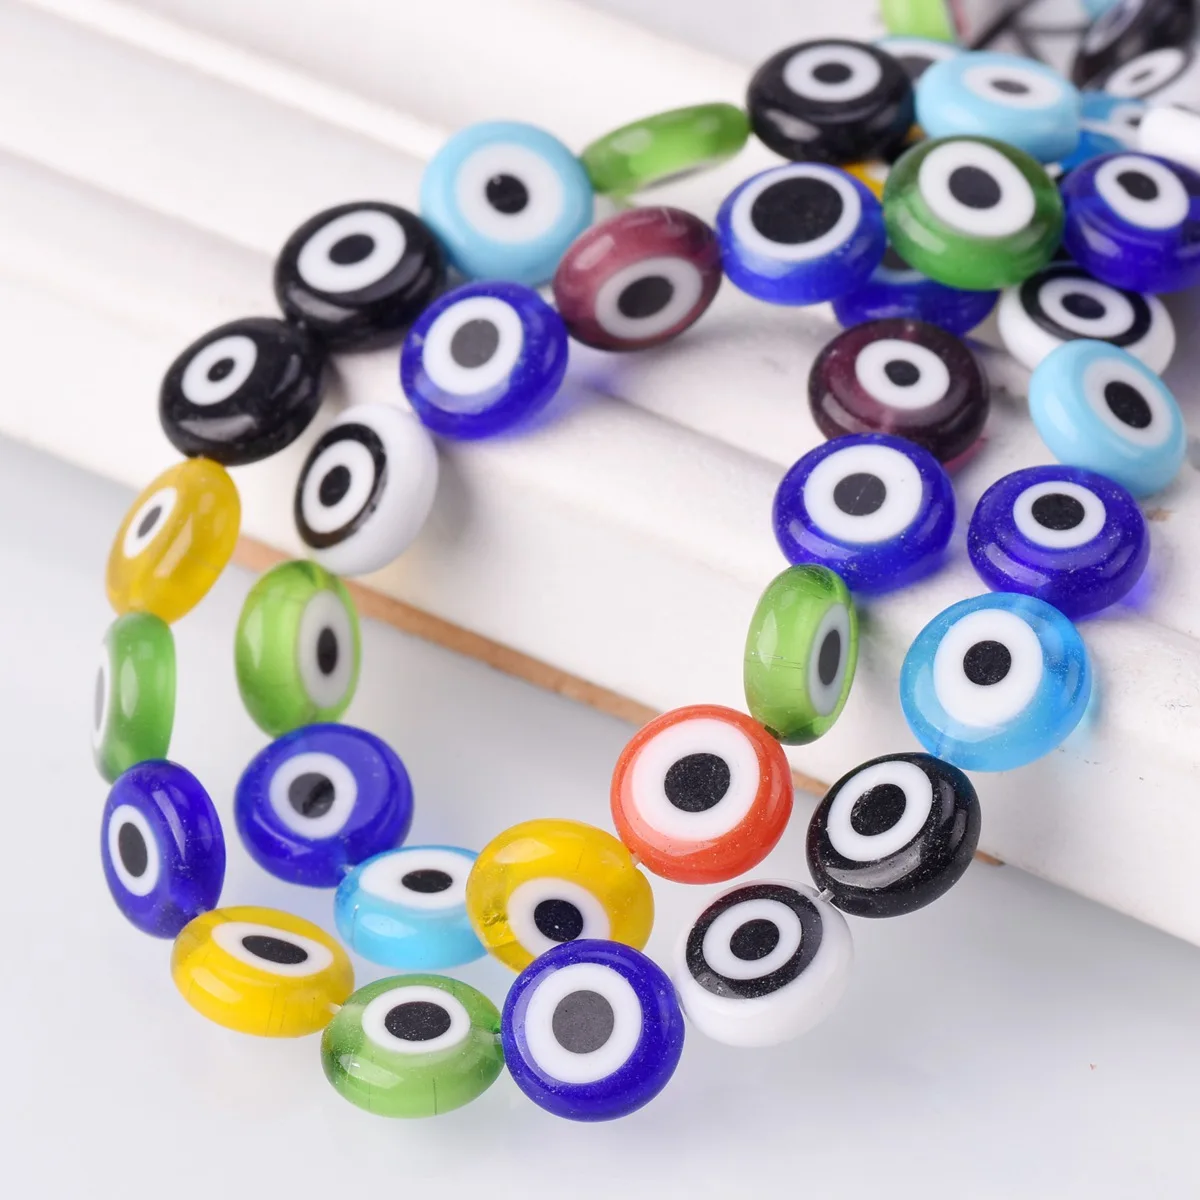 6mm 8mm 10mm 12mm Mixed Flat Round Evil Eye Millefiori Lampwork Glass Beads For Jewelry Making DIY Crafts Findings 5pcs 14mm flat round chinese characters double happiness lampwork glass loose beads for jewelry making diy crafts findings